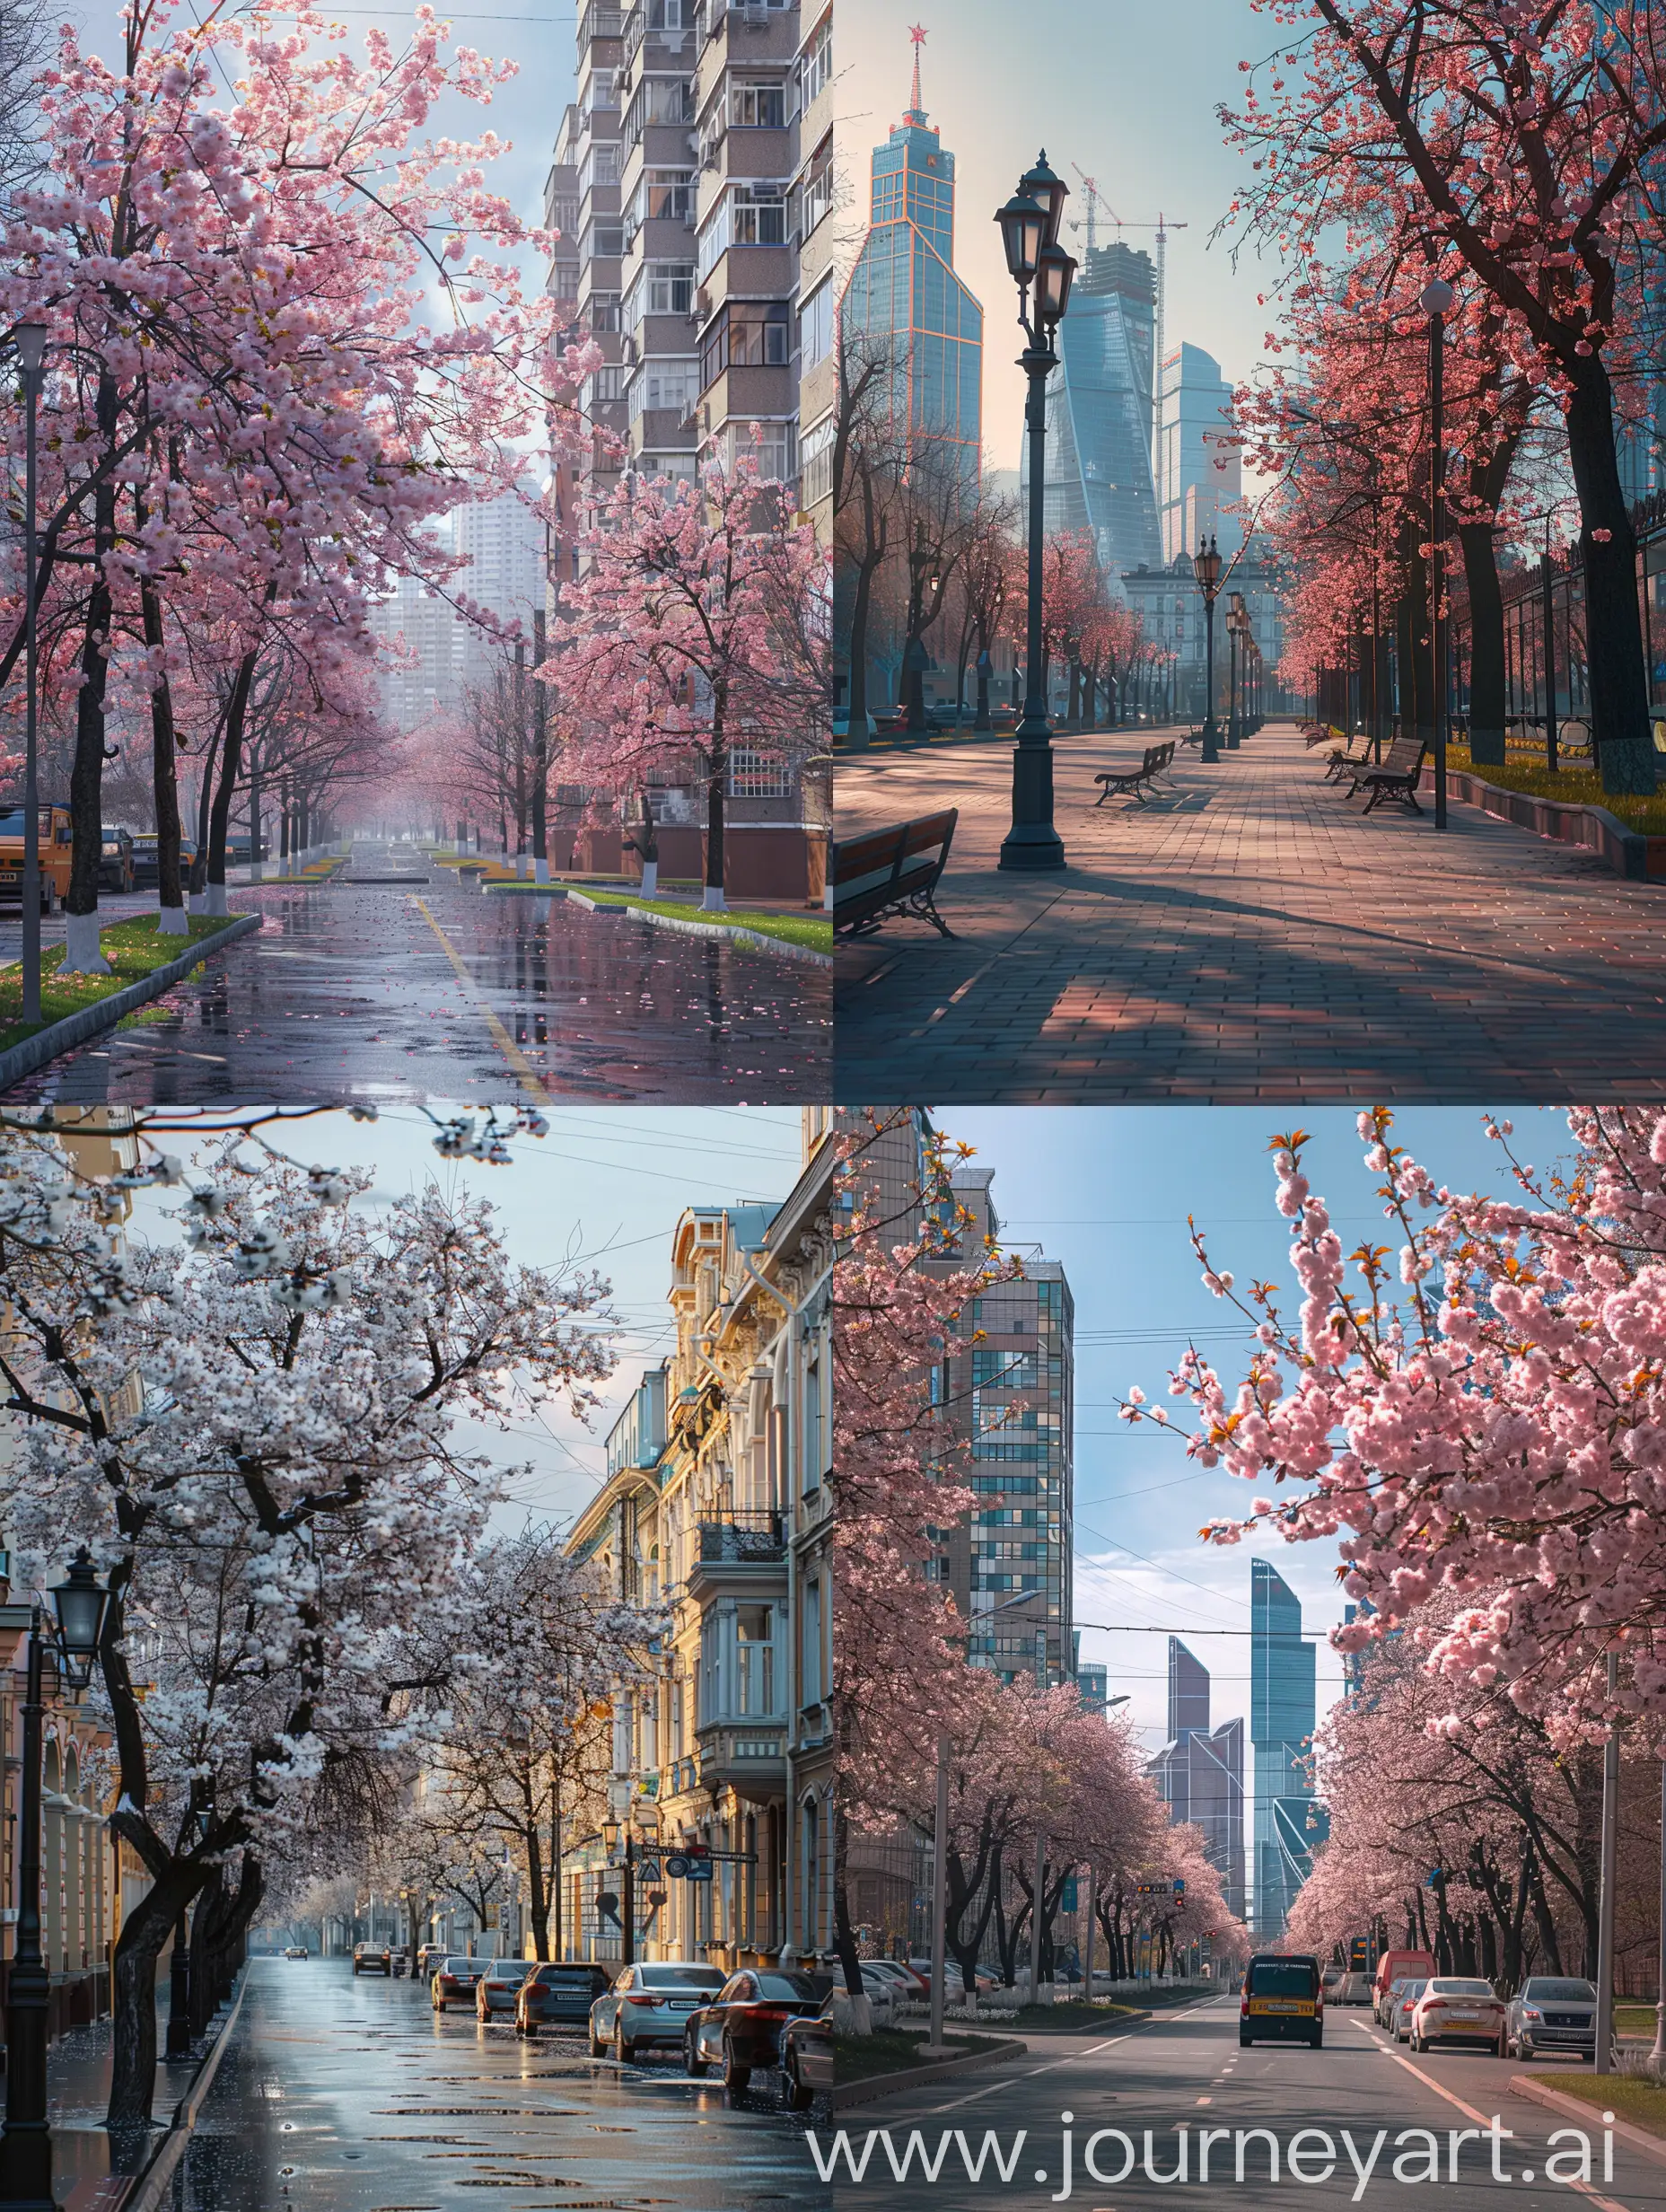 Modern-Russian-Cityscape-Springtime-Serenity-Captured-in-HighResolution-Raw-Style